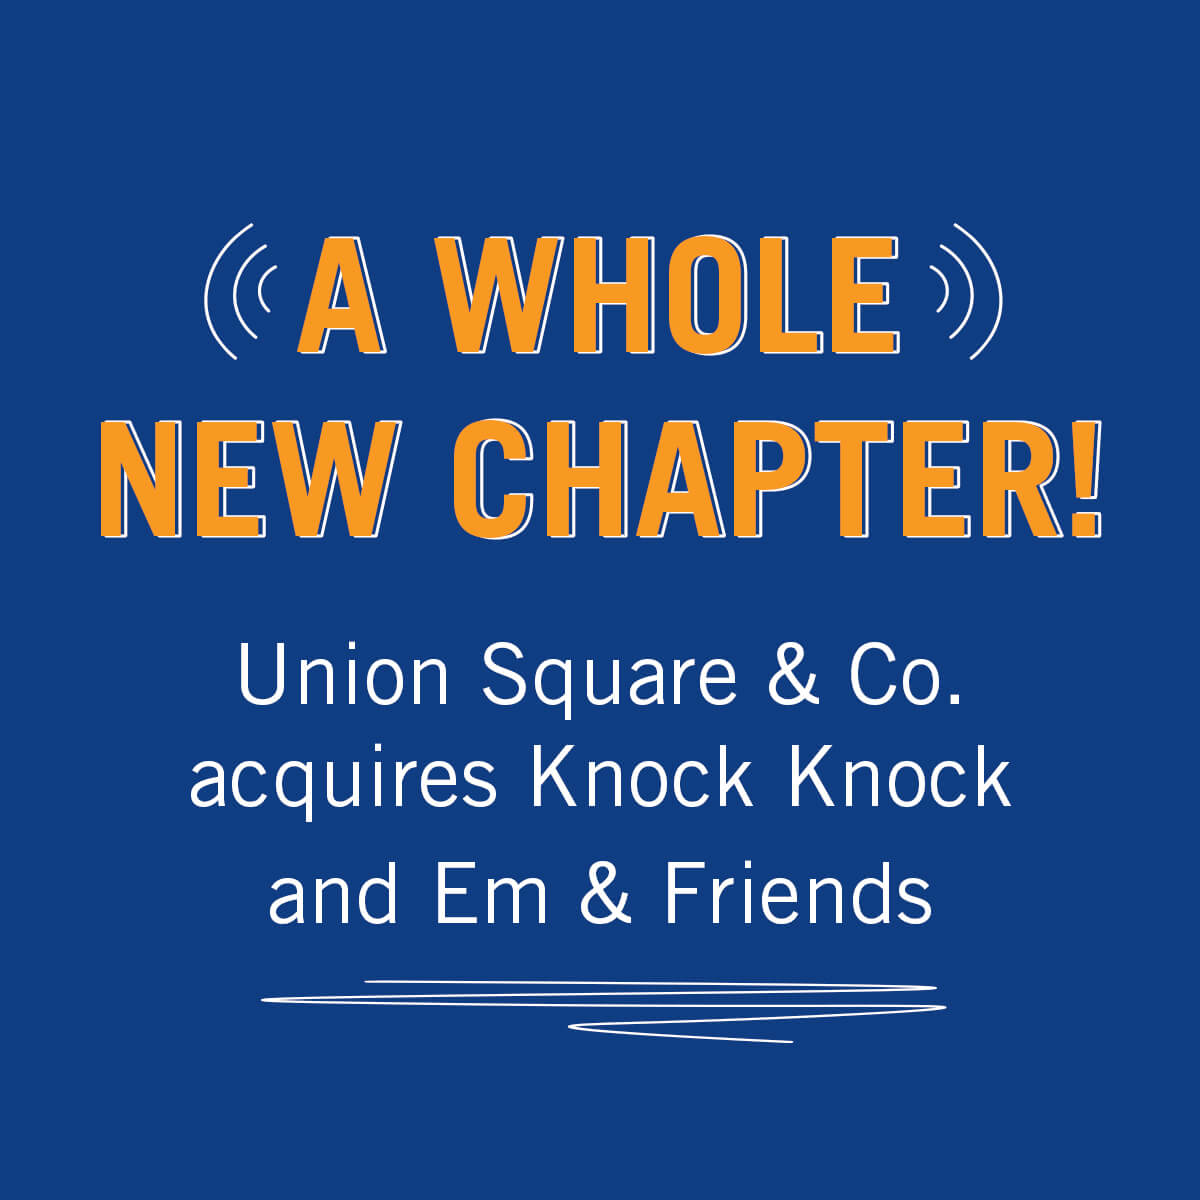 A Whole New Chapter! Union Square & Co. Acquires Knock Knock and Em & Friends